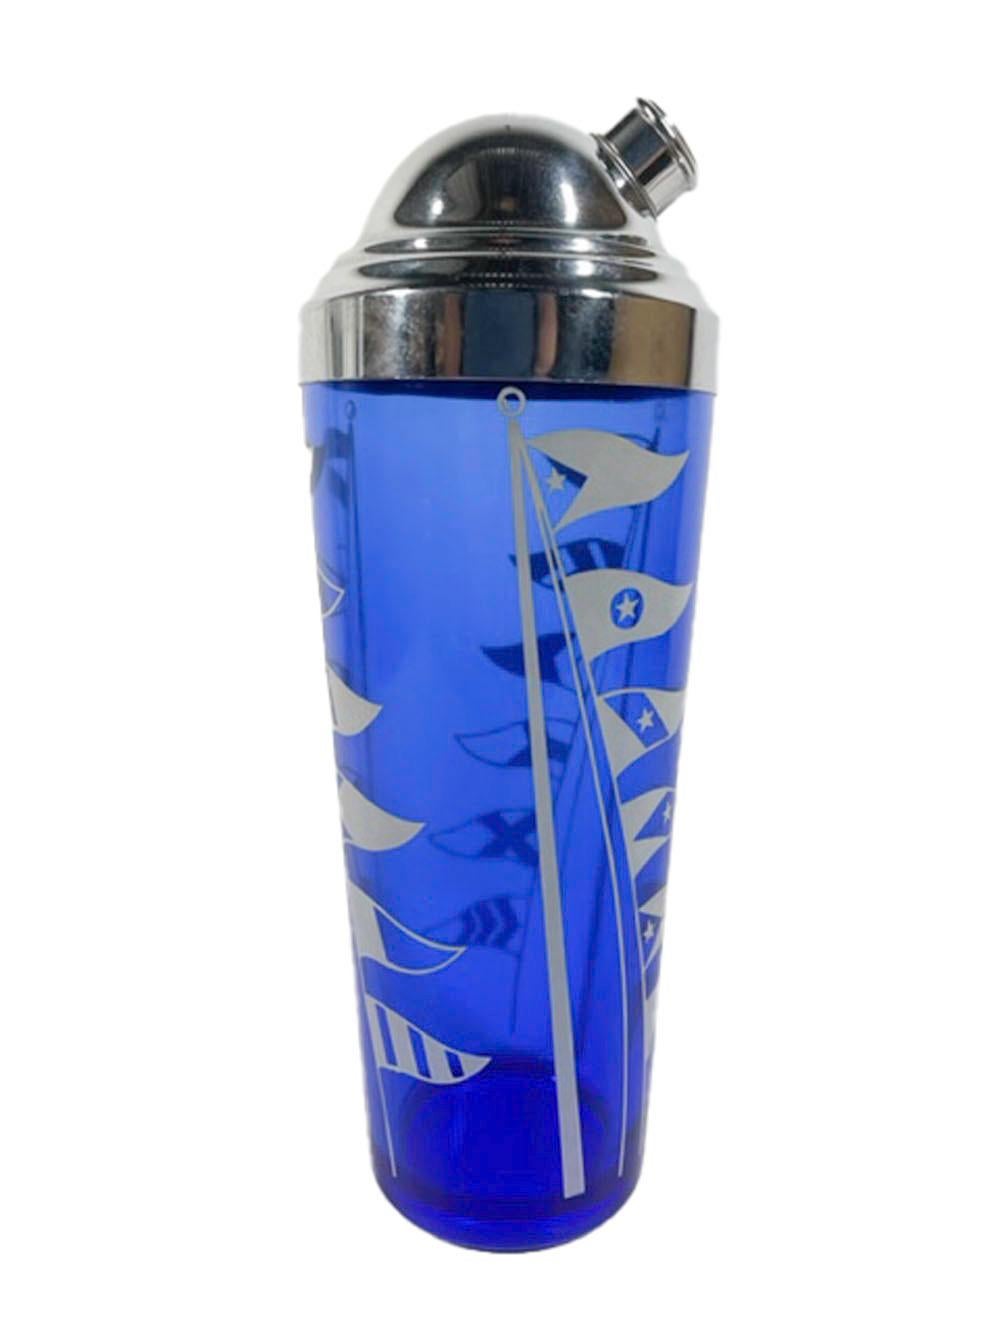 Art Deco cocktail shaker made by Hazel-Atlas, for their Sportsman Series in cobalt glass with white nautical flags and domed chrome lid.